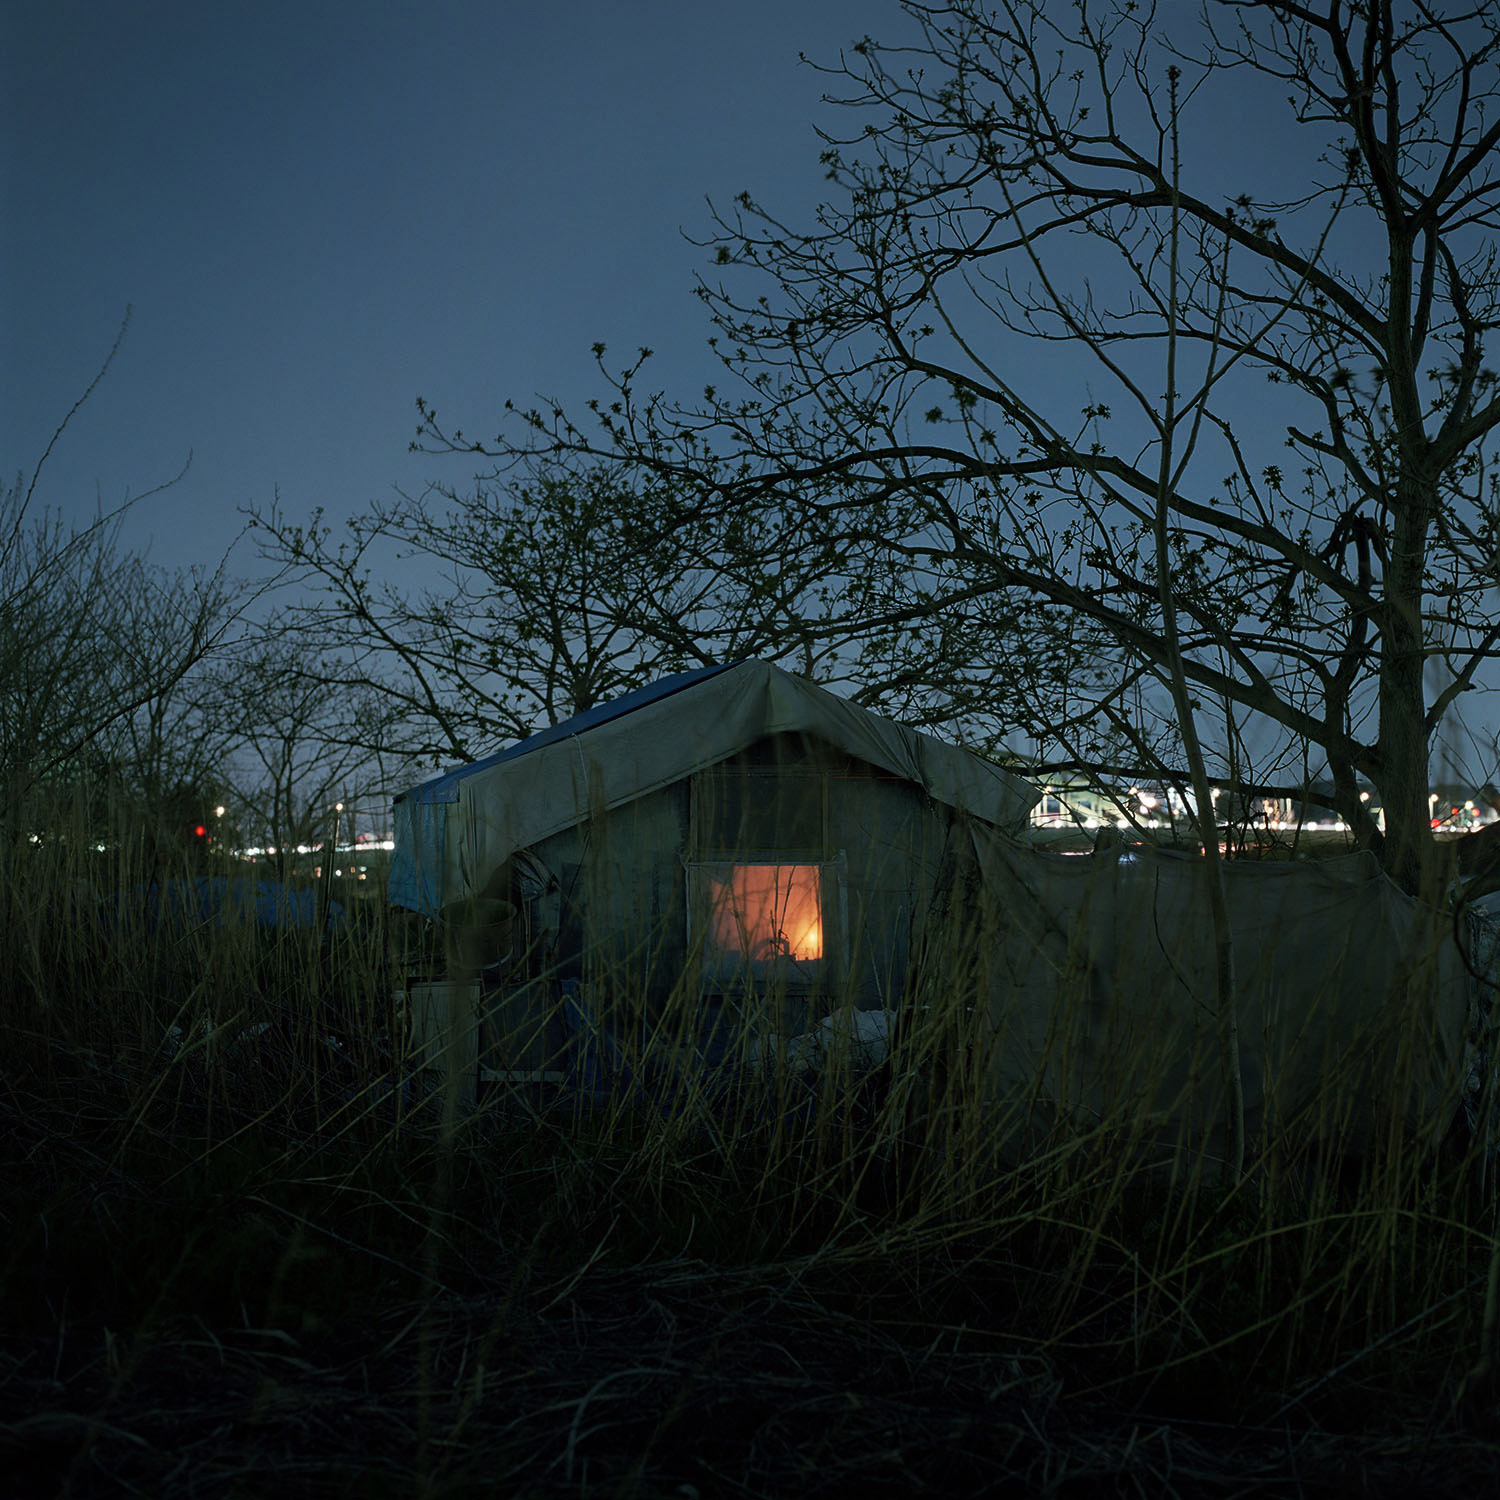 homeless man's shelter along the tama river. march, 2014.